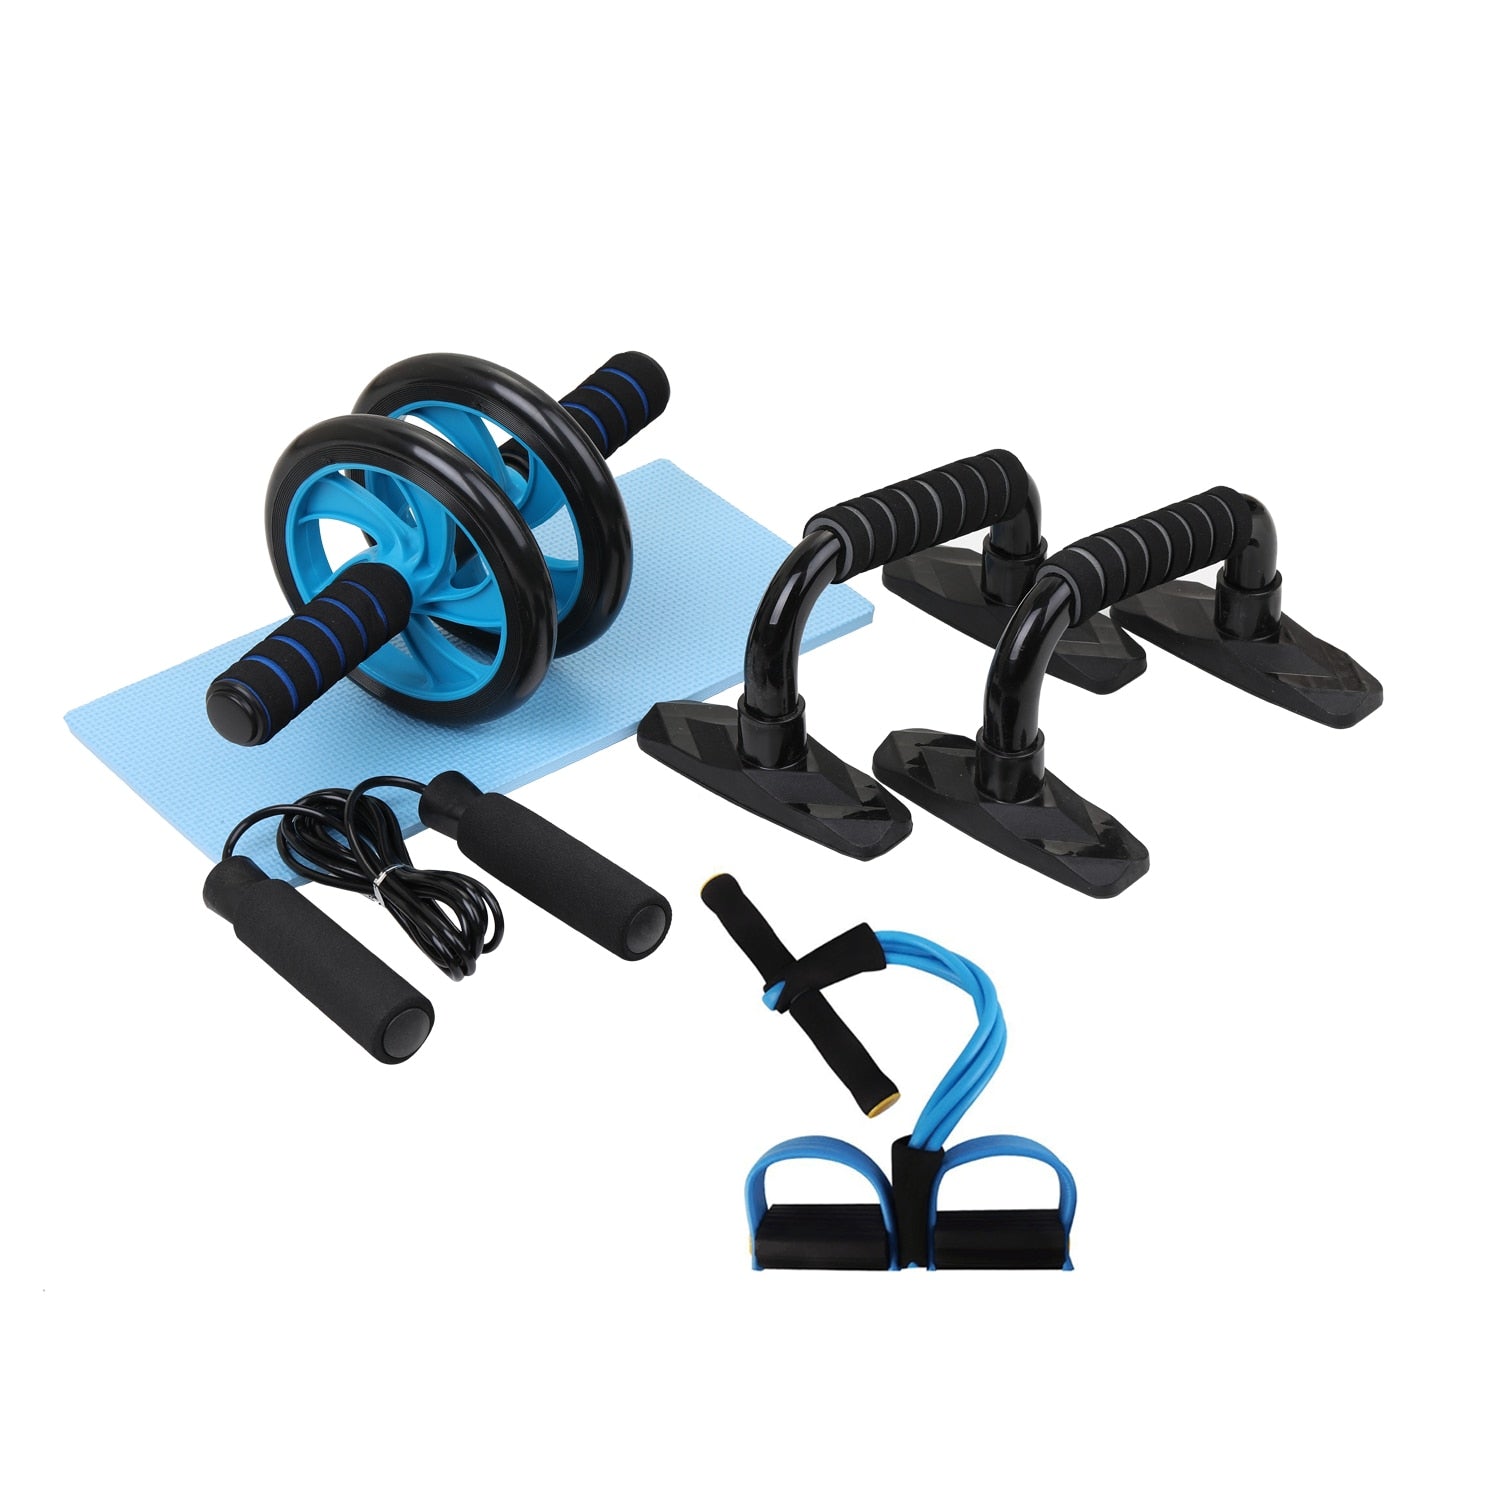 5-in-1 Muscle Trainer Pack